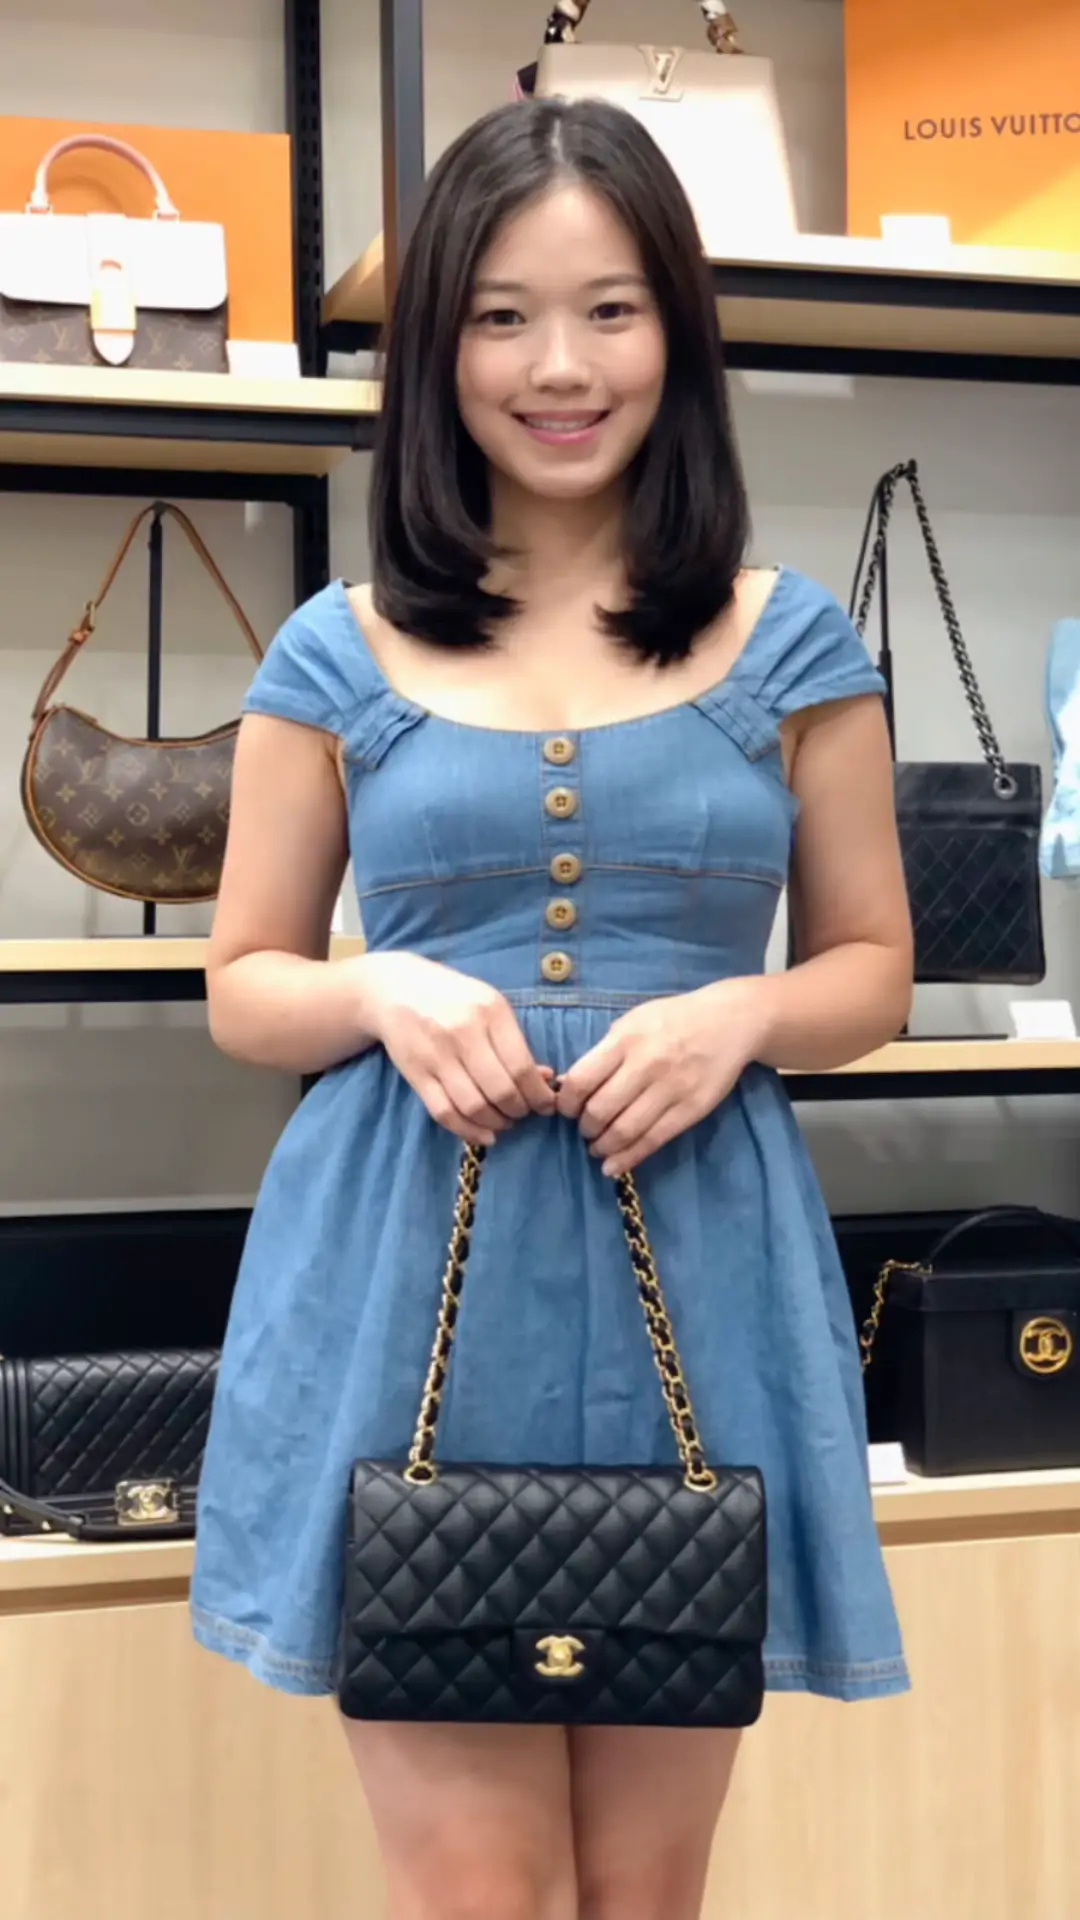 CHANEL Medium Classic Flap Shoulder Bag in Black L, Video published by  Luxie Moxie